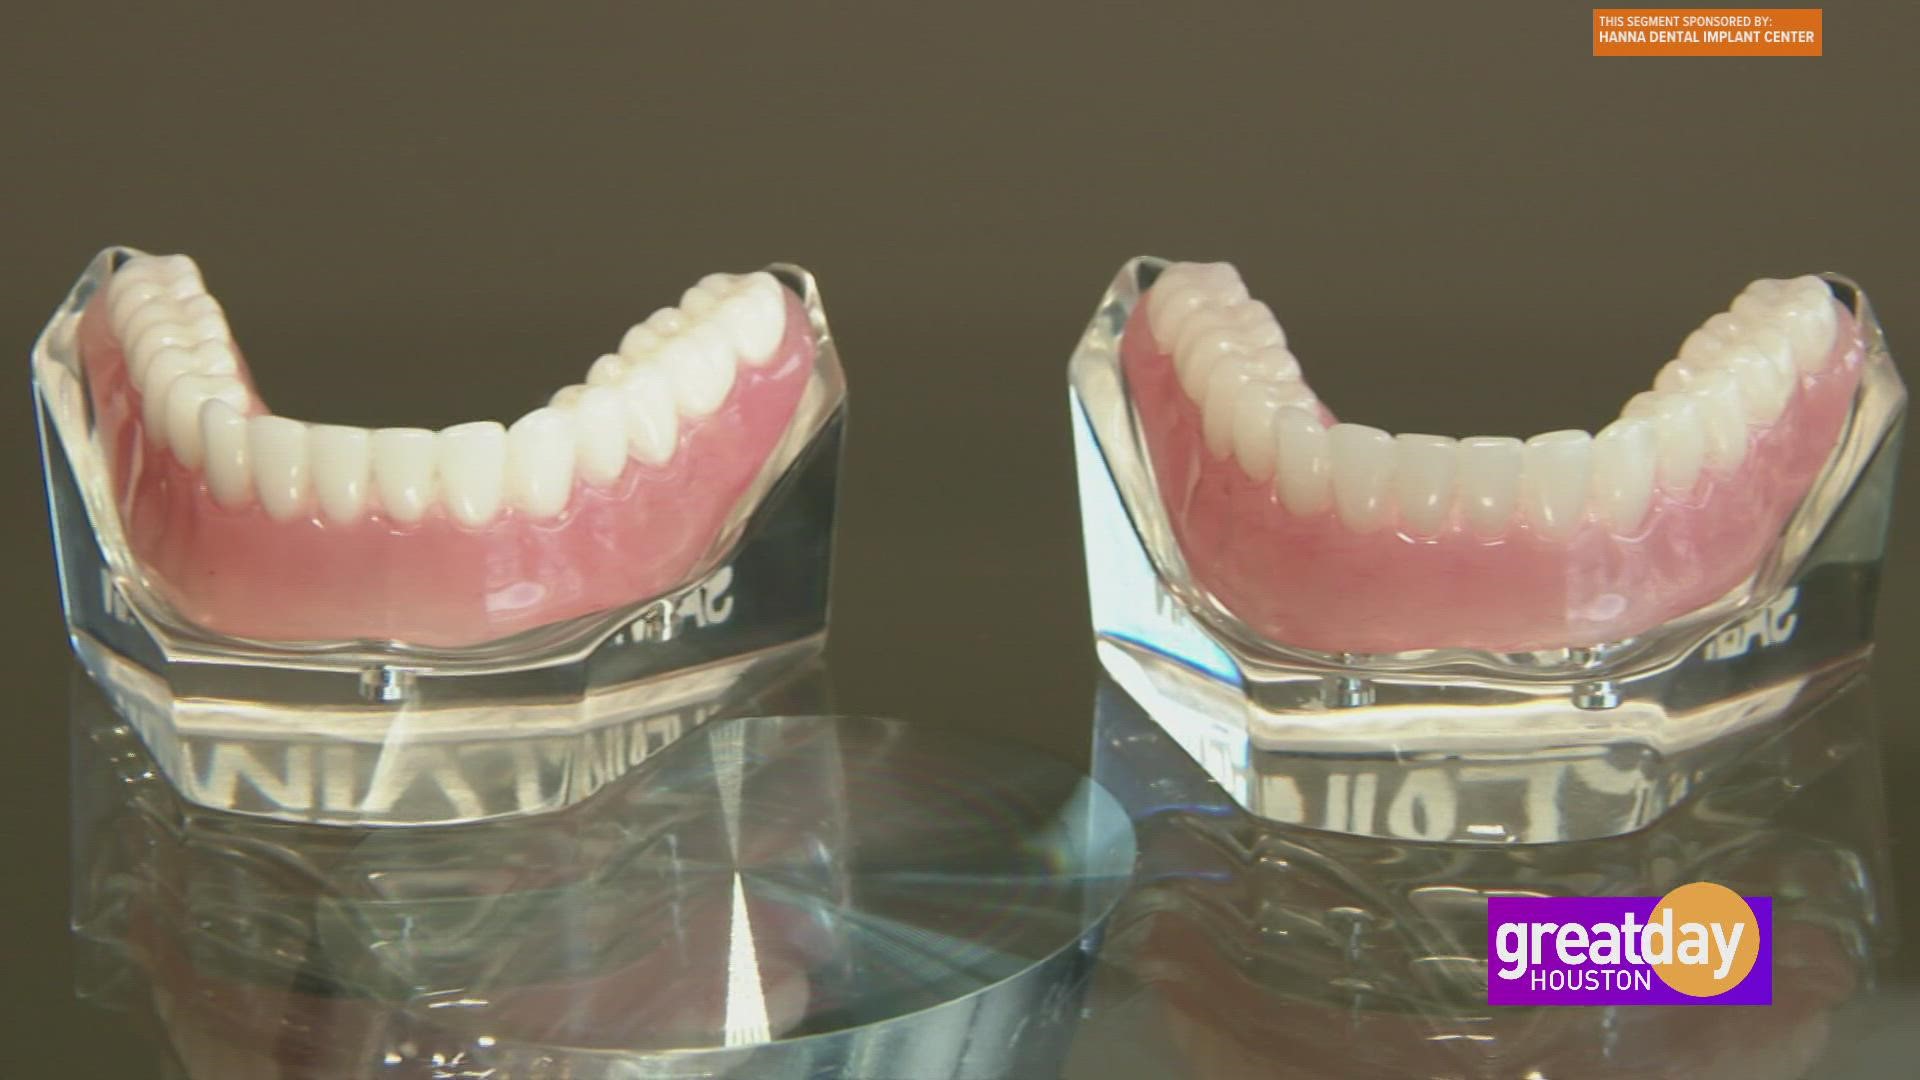 Makeover your smile with Dr. Raouf Hanna of Hanna Dental Implant Center